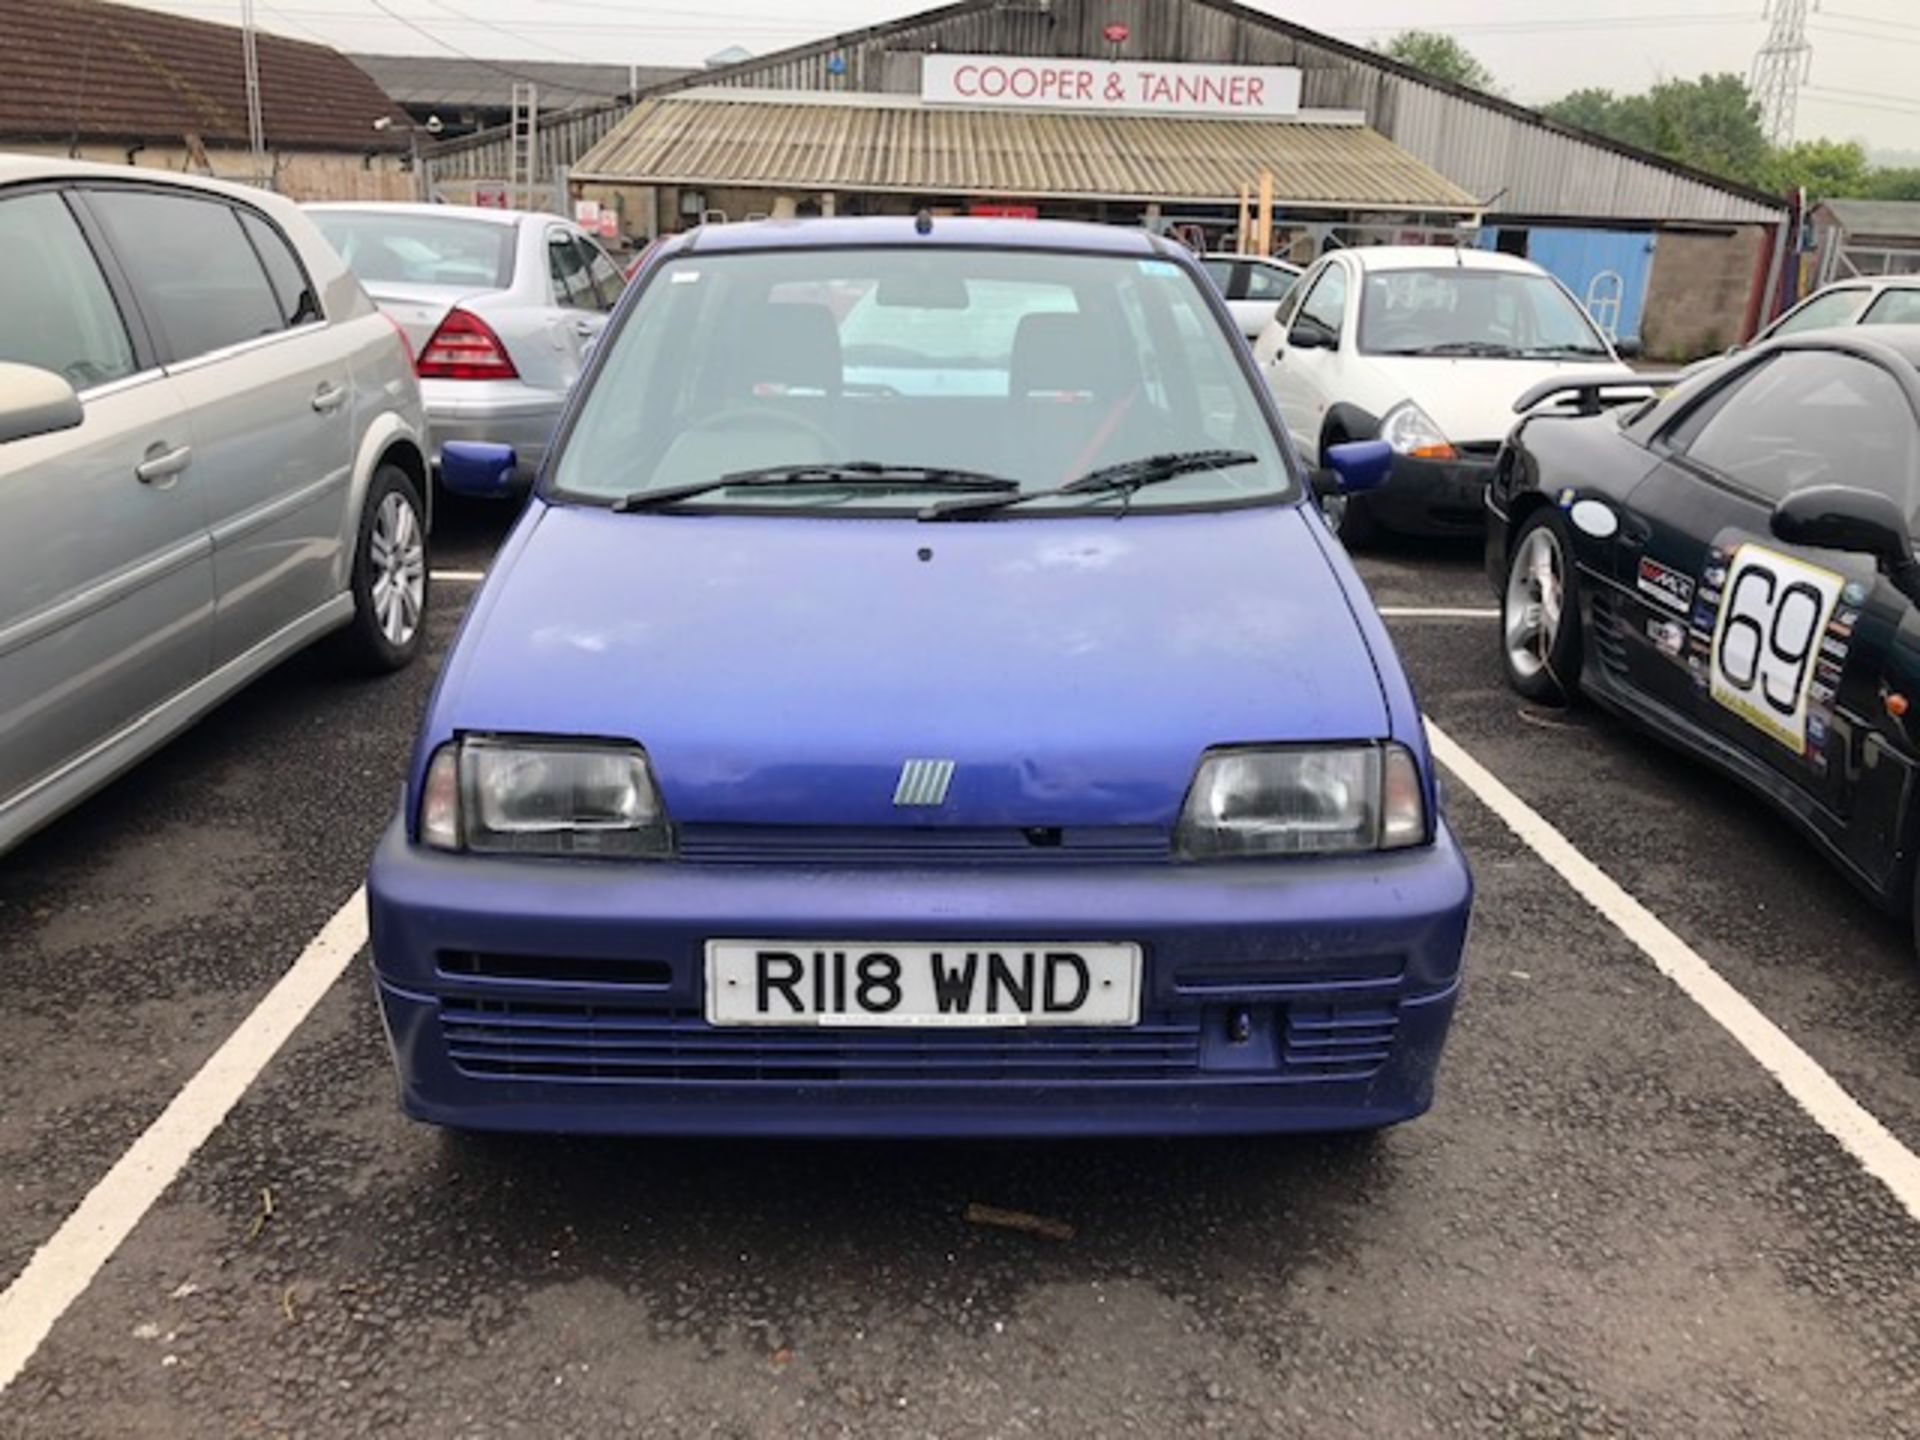 Fiat Cinquecento Reg No R118 WND 2 door in blue. We have V5 and keys, this vehicle started very